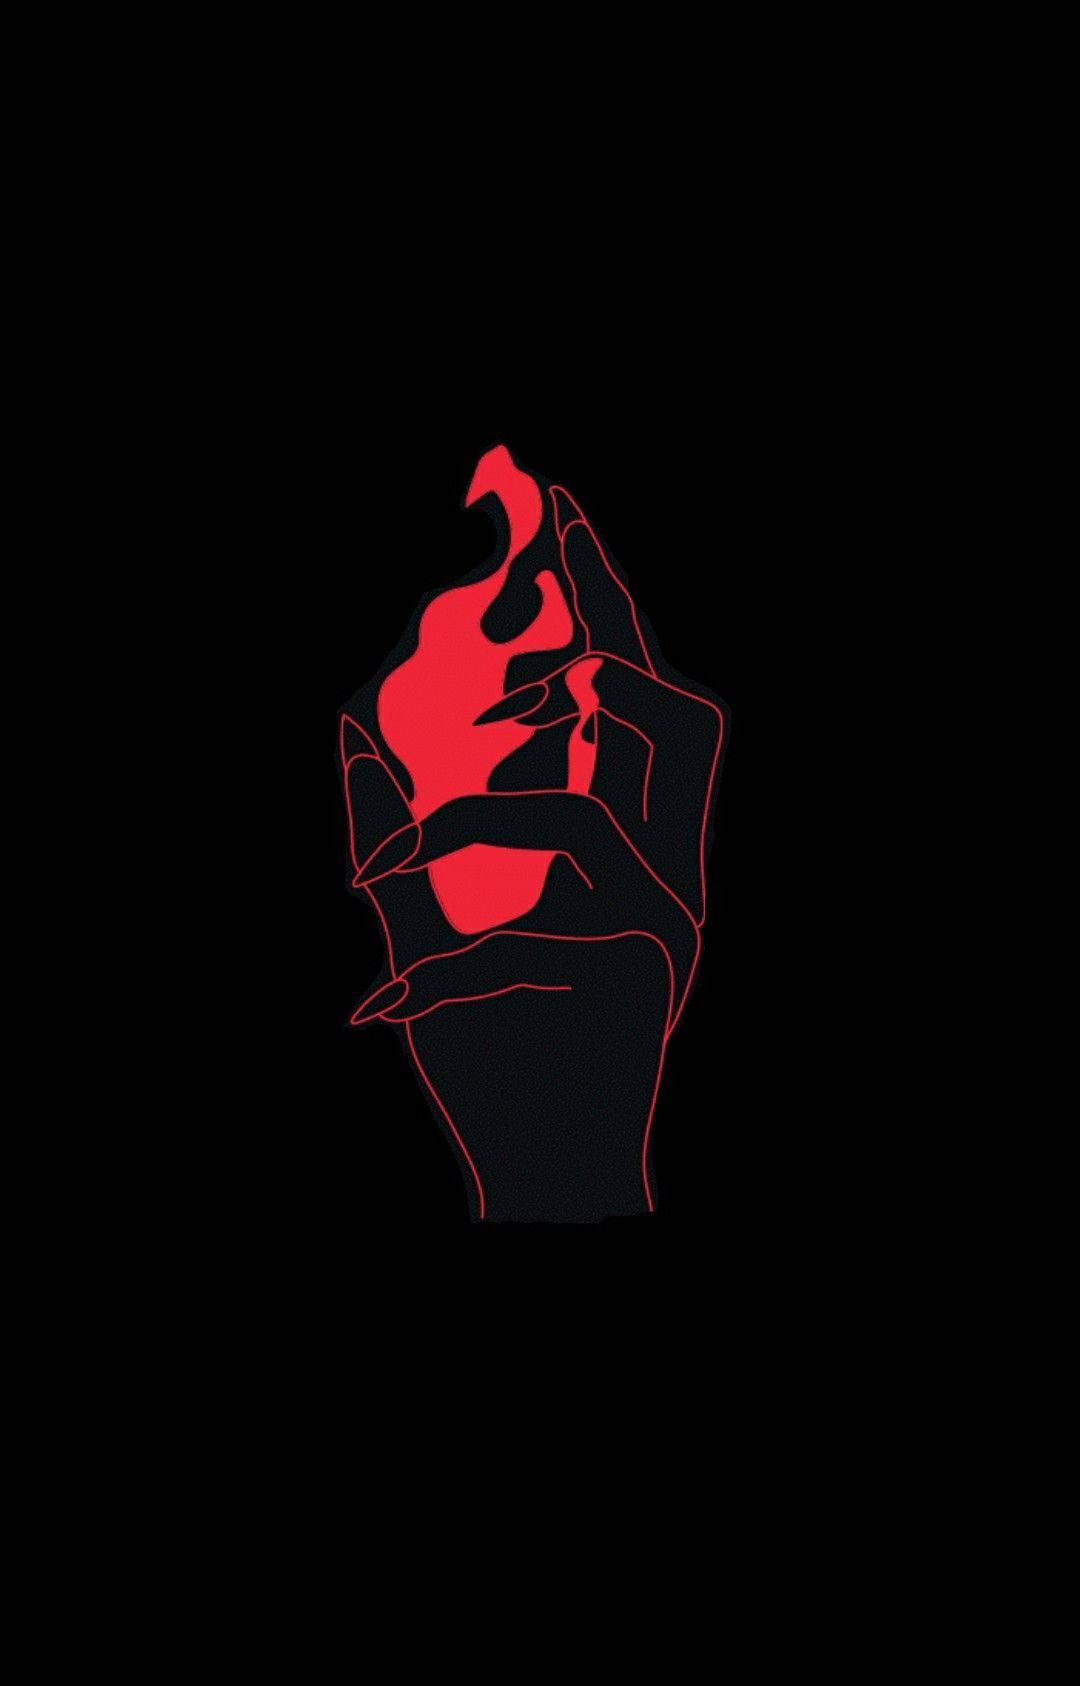 Trippy Dark Hand With Flame Wallpaper